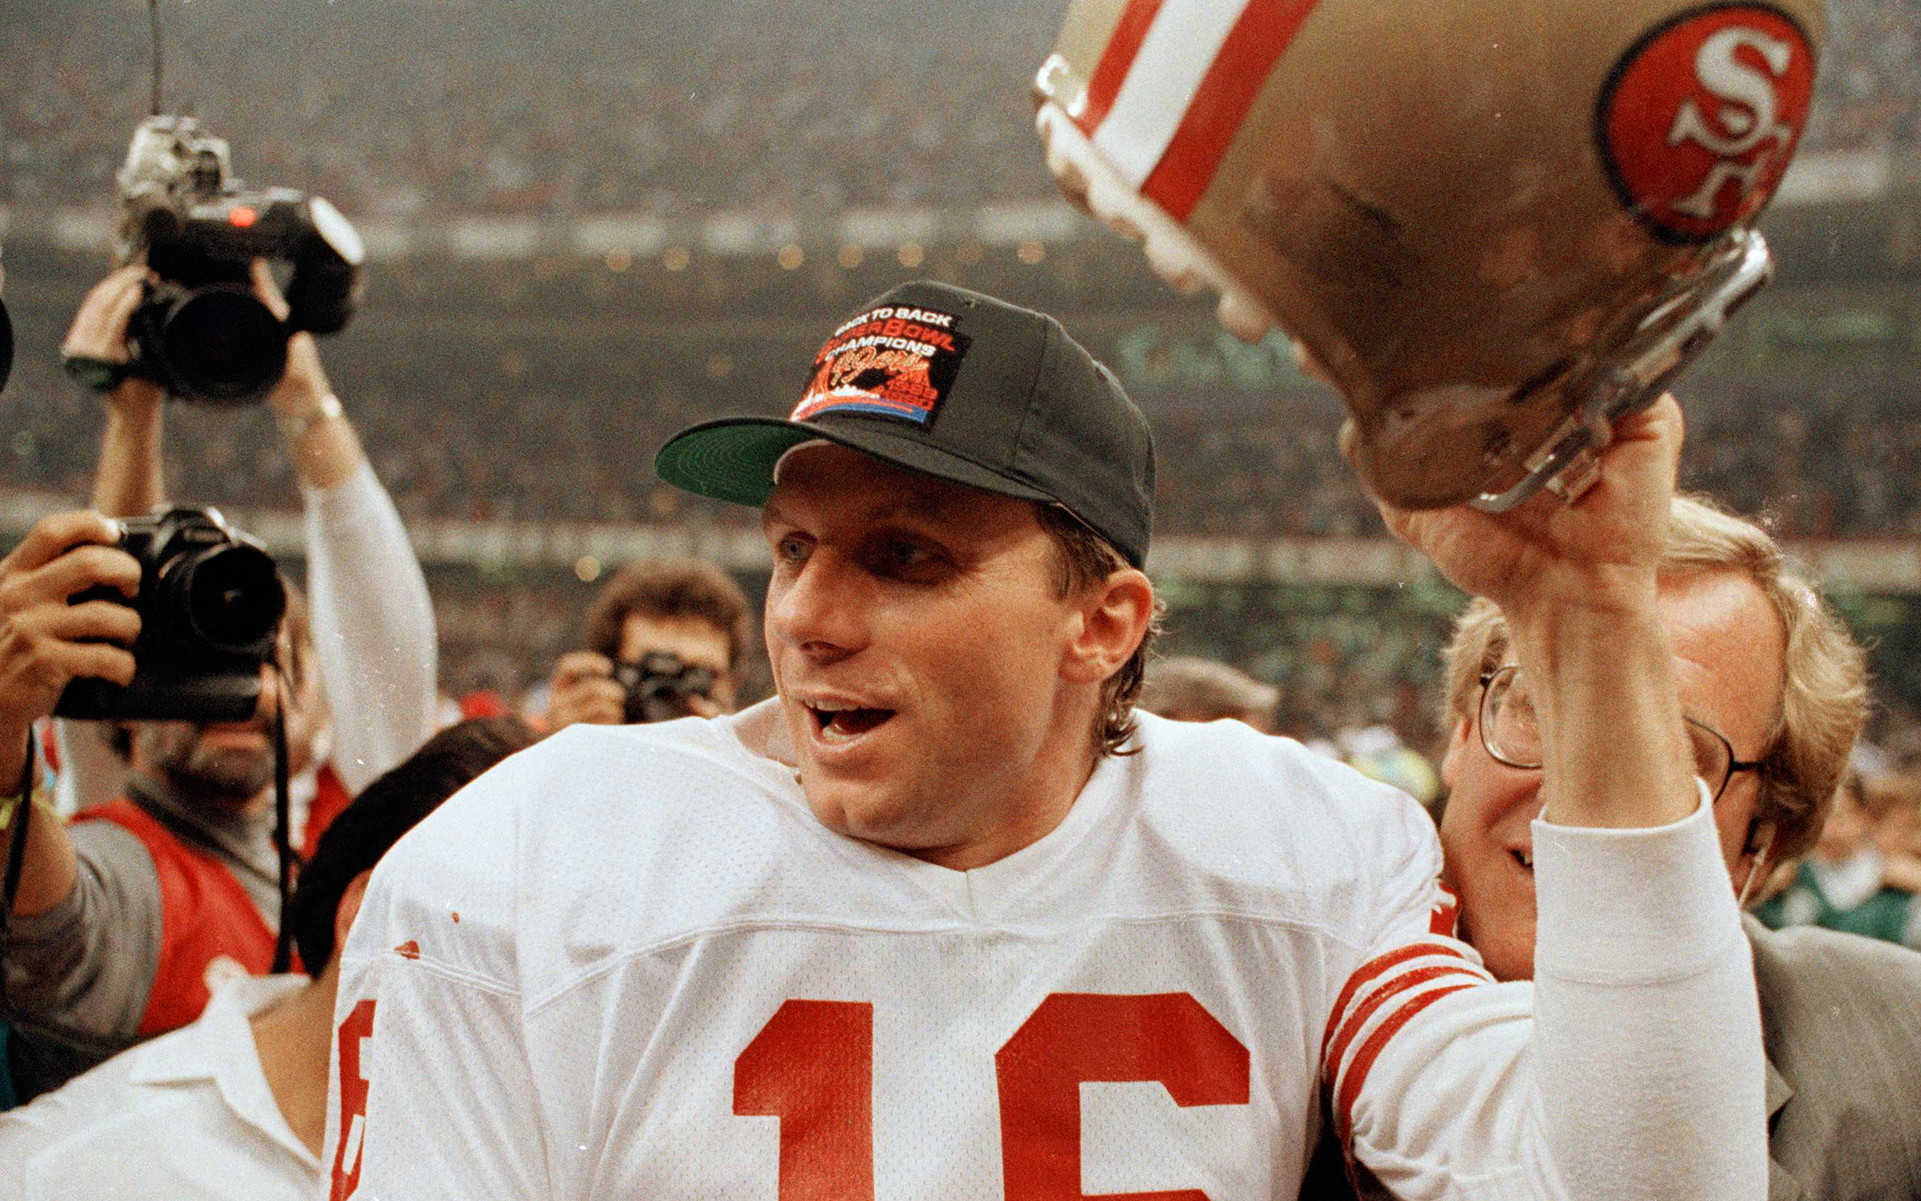 1921x1201 NFL Hall of Famer Joe Montana Invests in Cannabis Media Outlet | Leafly